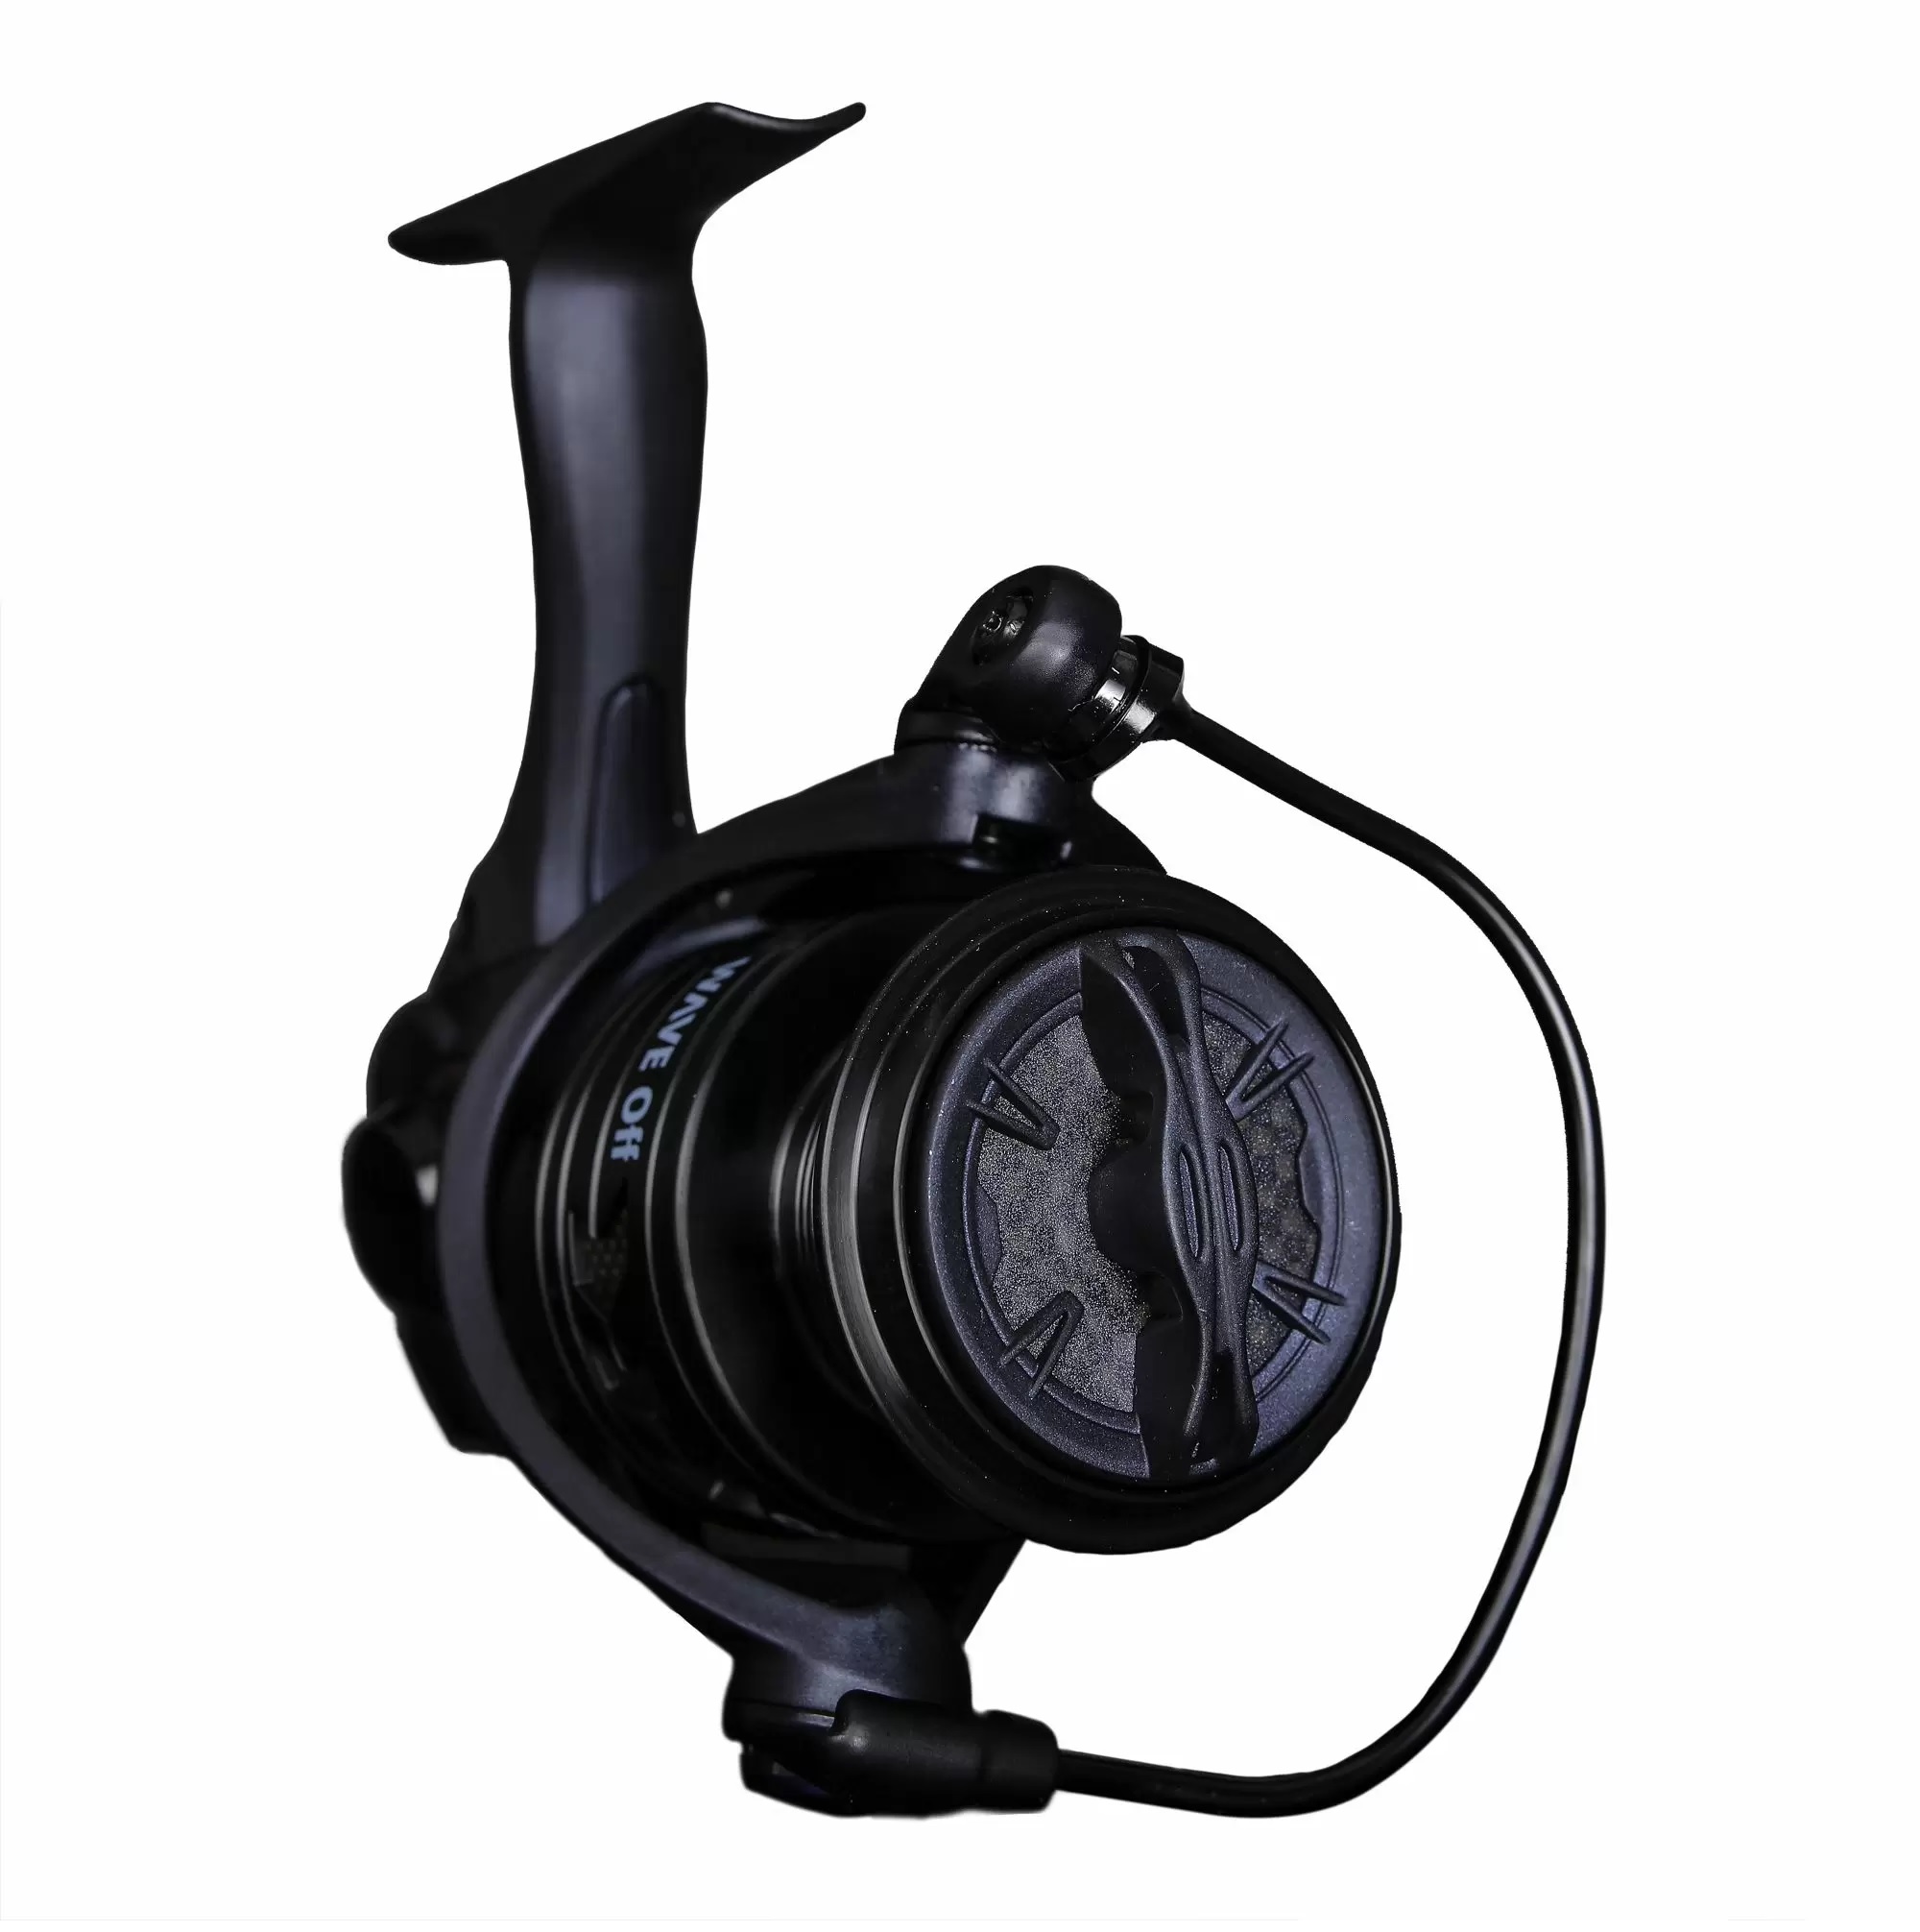 Okuma Wave Off Urban Fishing Spinnrolle + Special Paint Off Farbe (Limited Edition)